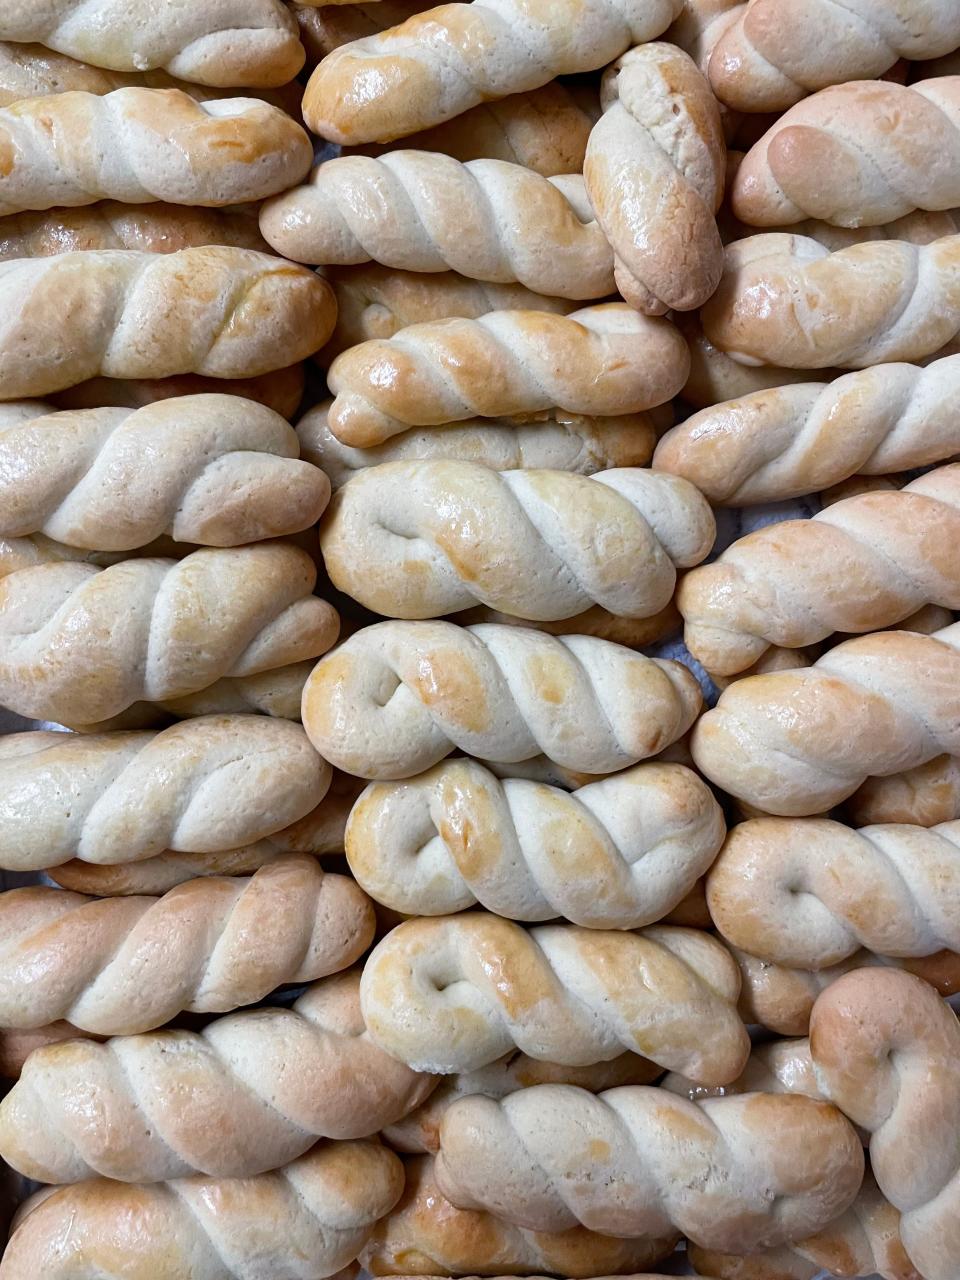 Koularakia, a traditional twisted coffee cookie will be sold at the Greek Easter bake sale April 5 and 6 at Annunciation Greek Orthodox Church in Akron.